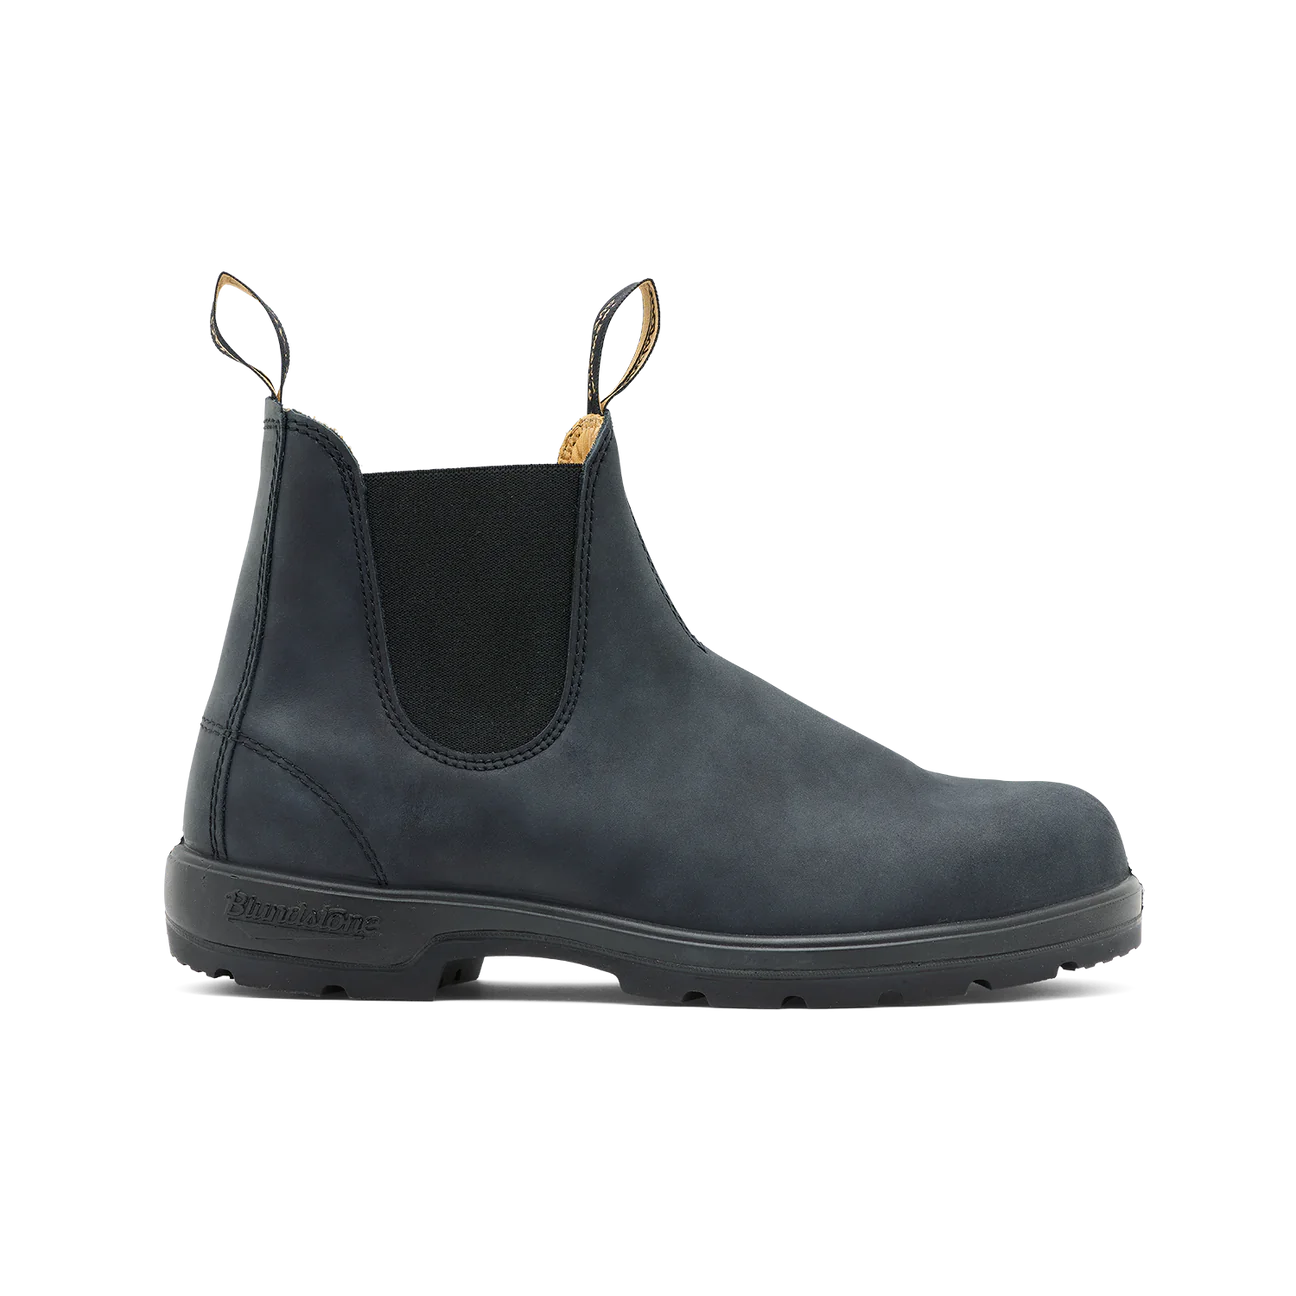 Blundstone 587 Classic Boots